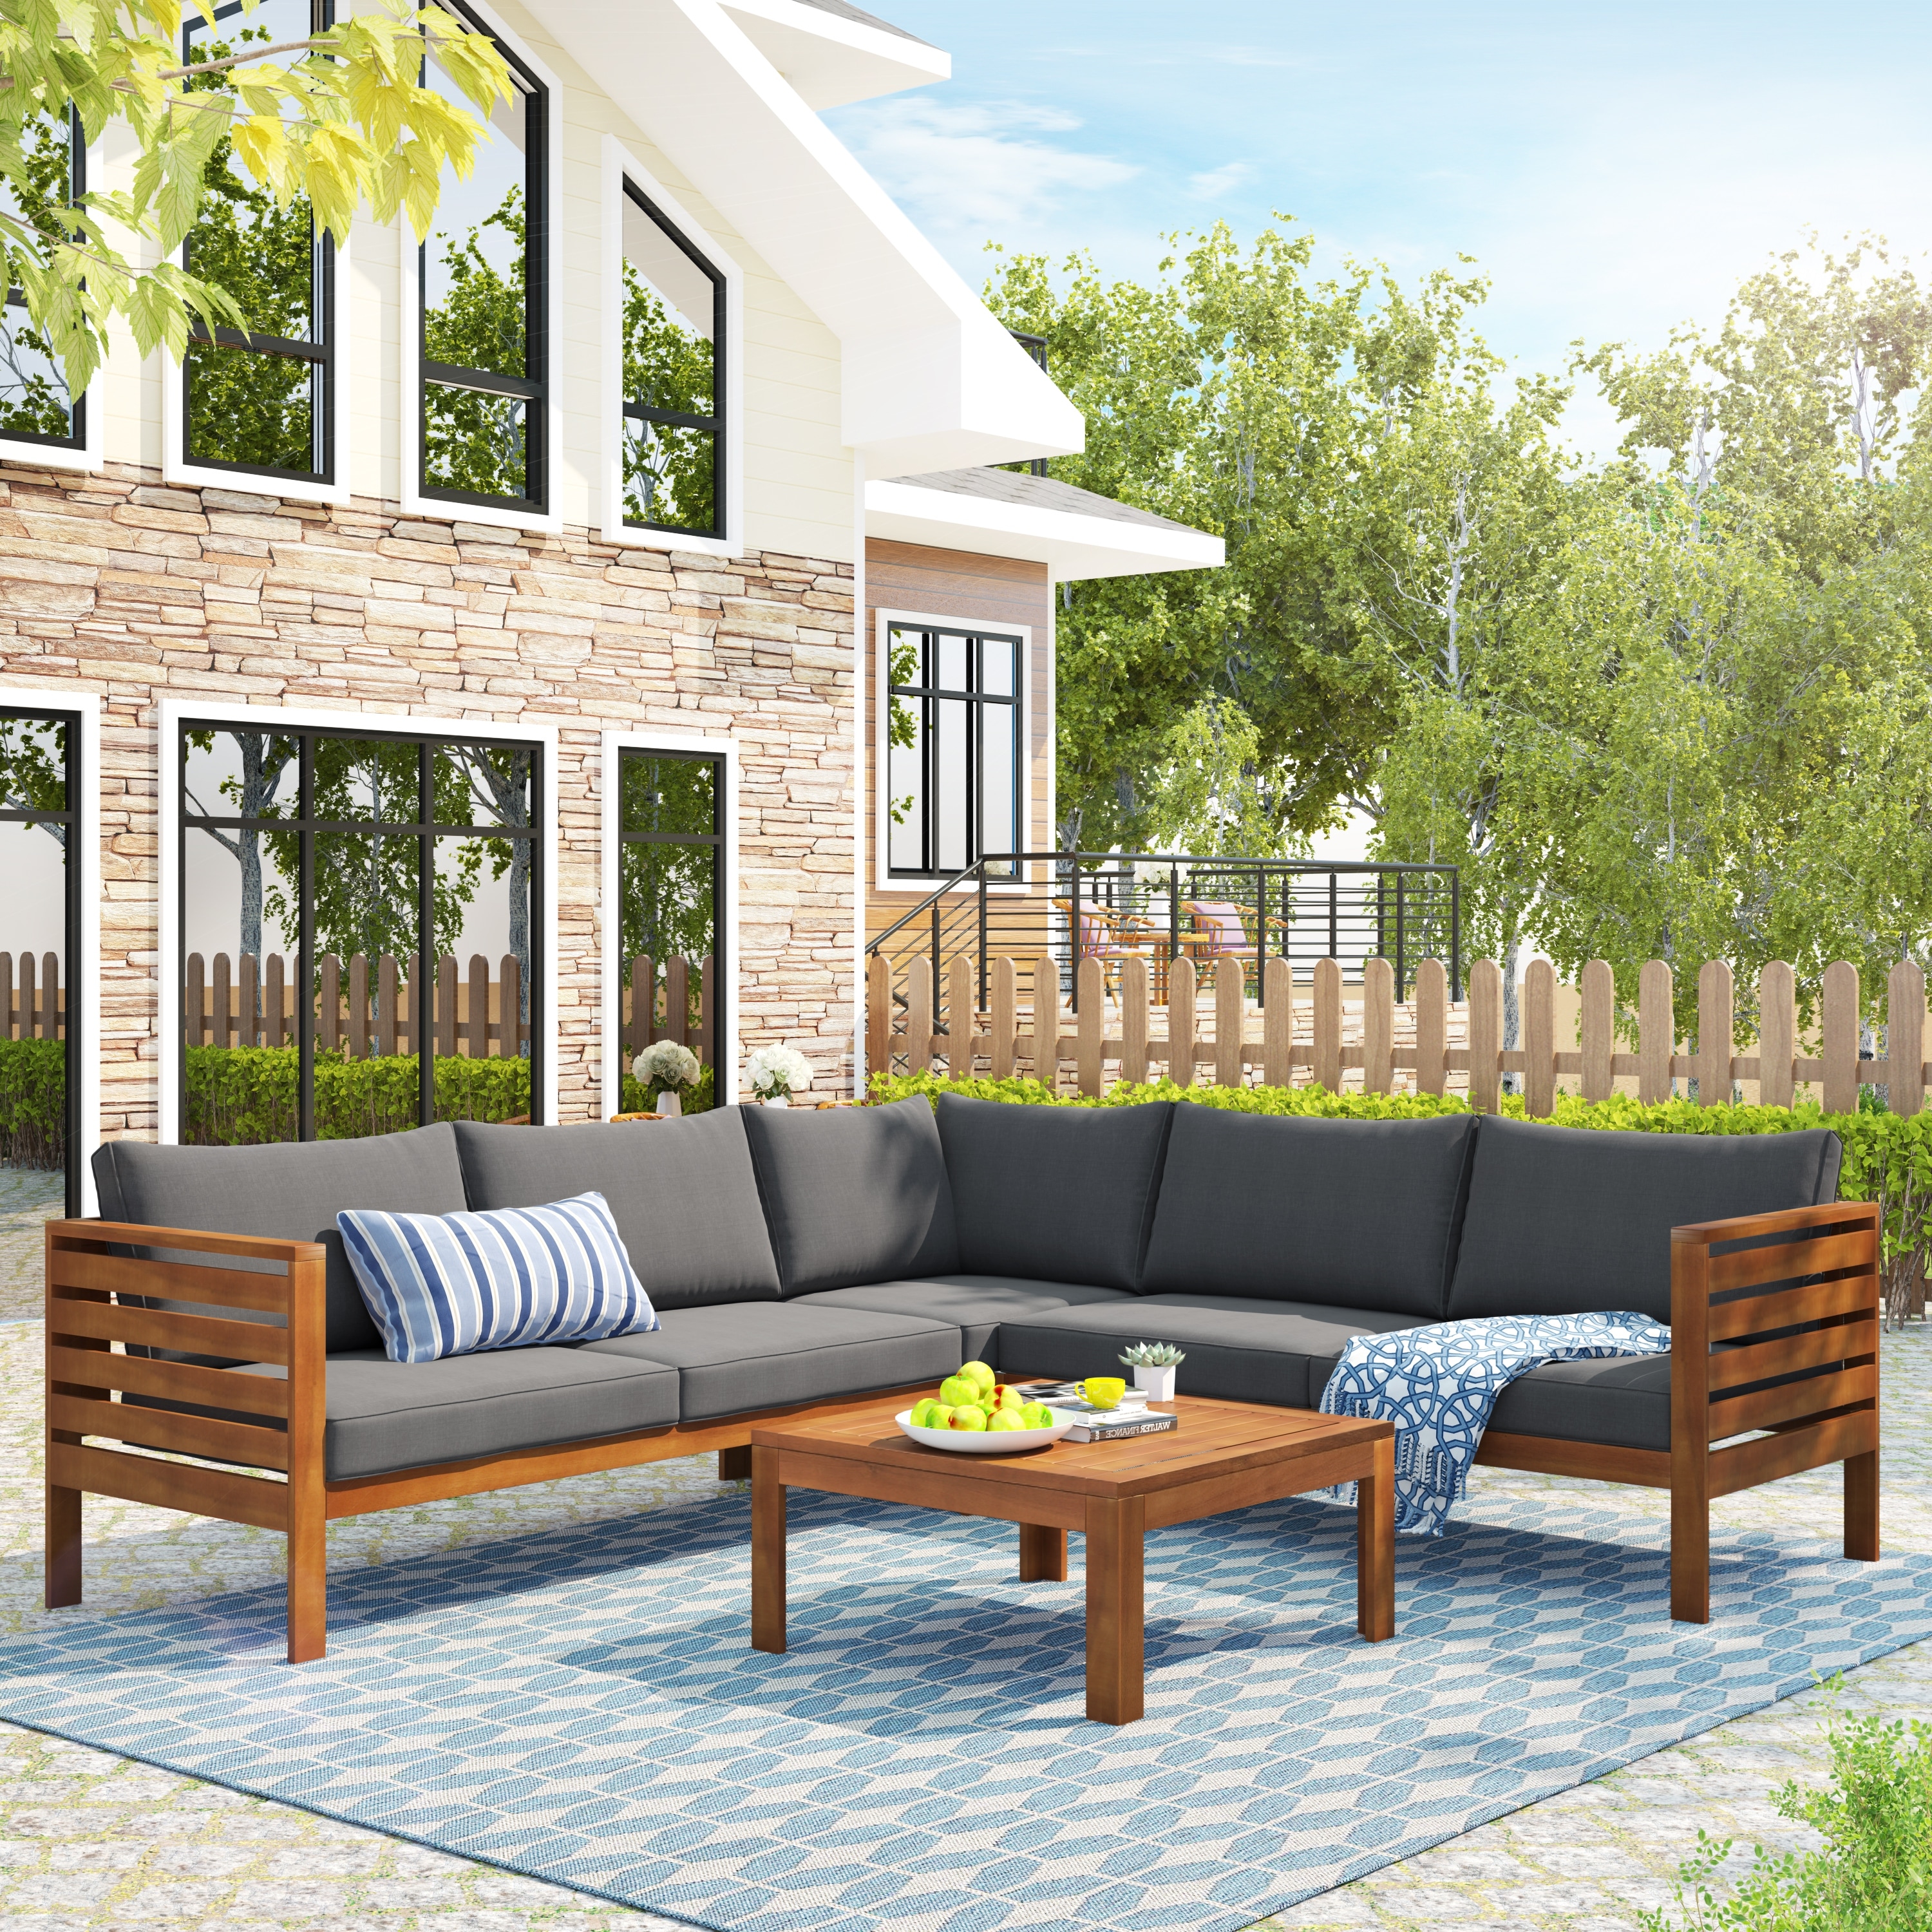 Gray Natural Log Wood Outdoor Sofa Set With Cushions embrace The Tranquil Beauty Of Japanese Zen Poetry In Your Outdoor Space